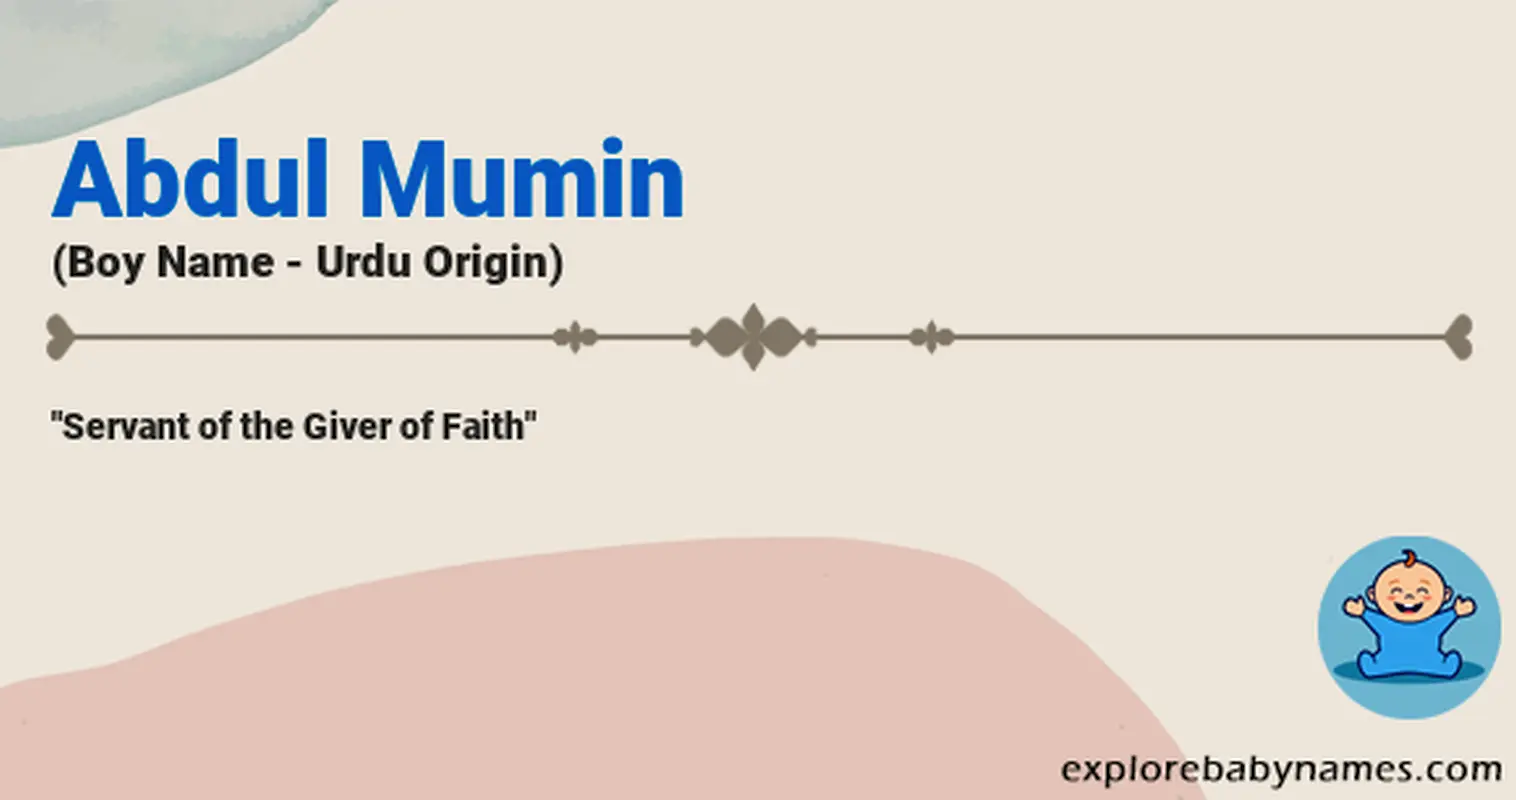 Meaning of Abdul Mumin